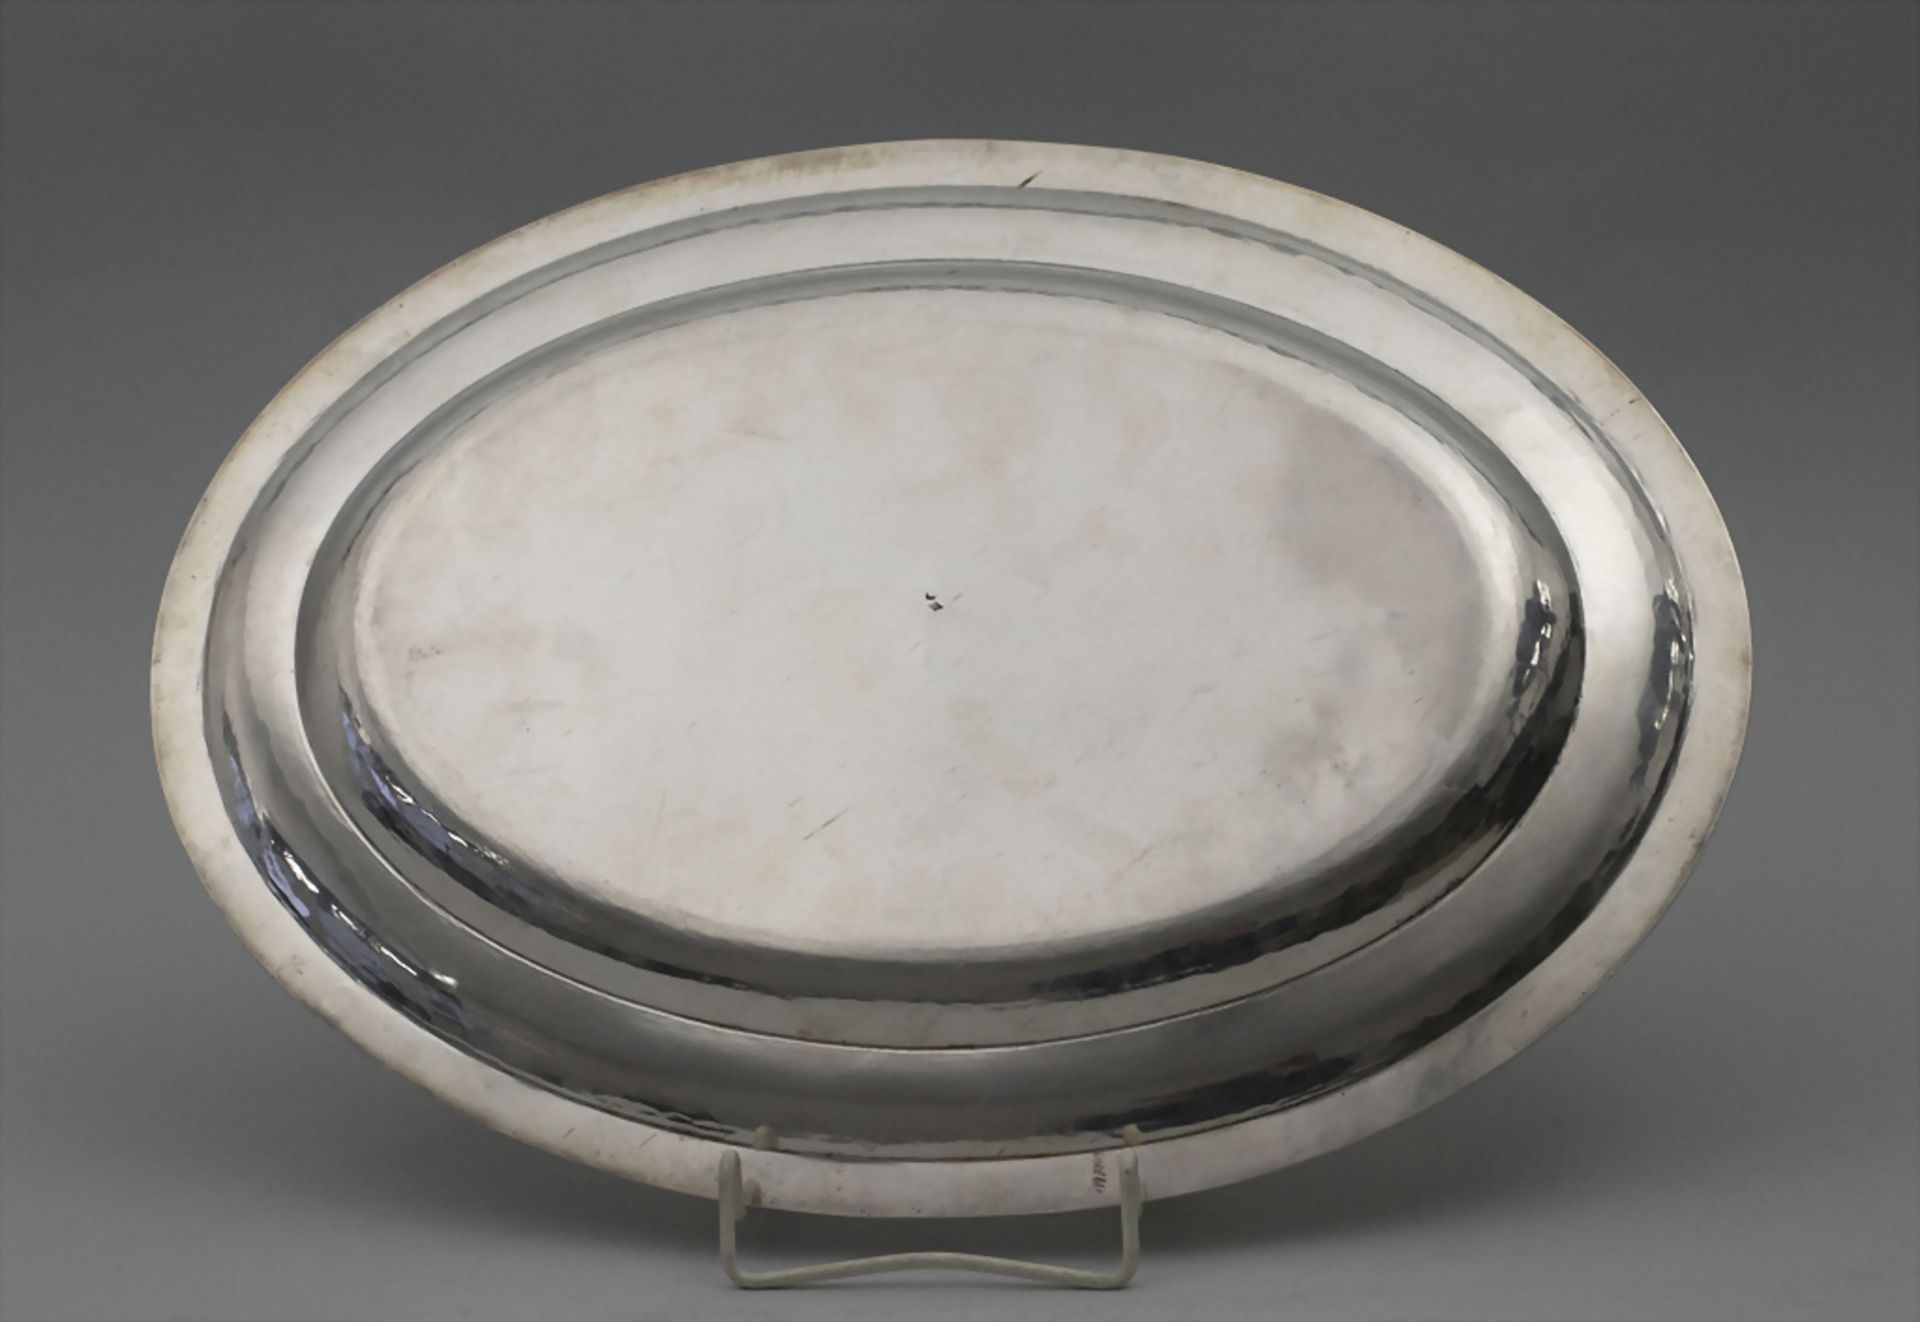 Ovale Plate / A large silver tray, Debain & Flament, Paris, 1870 - Image 2 of 6